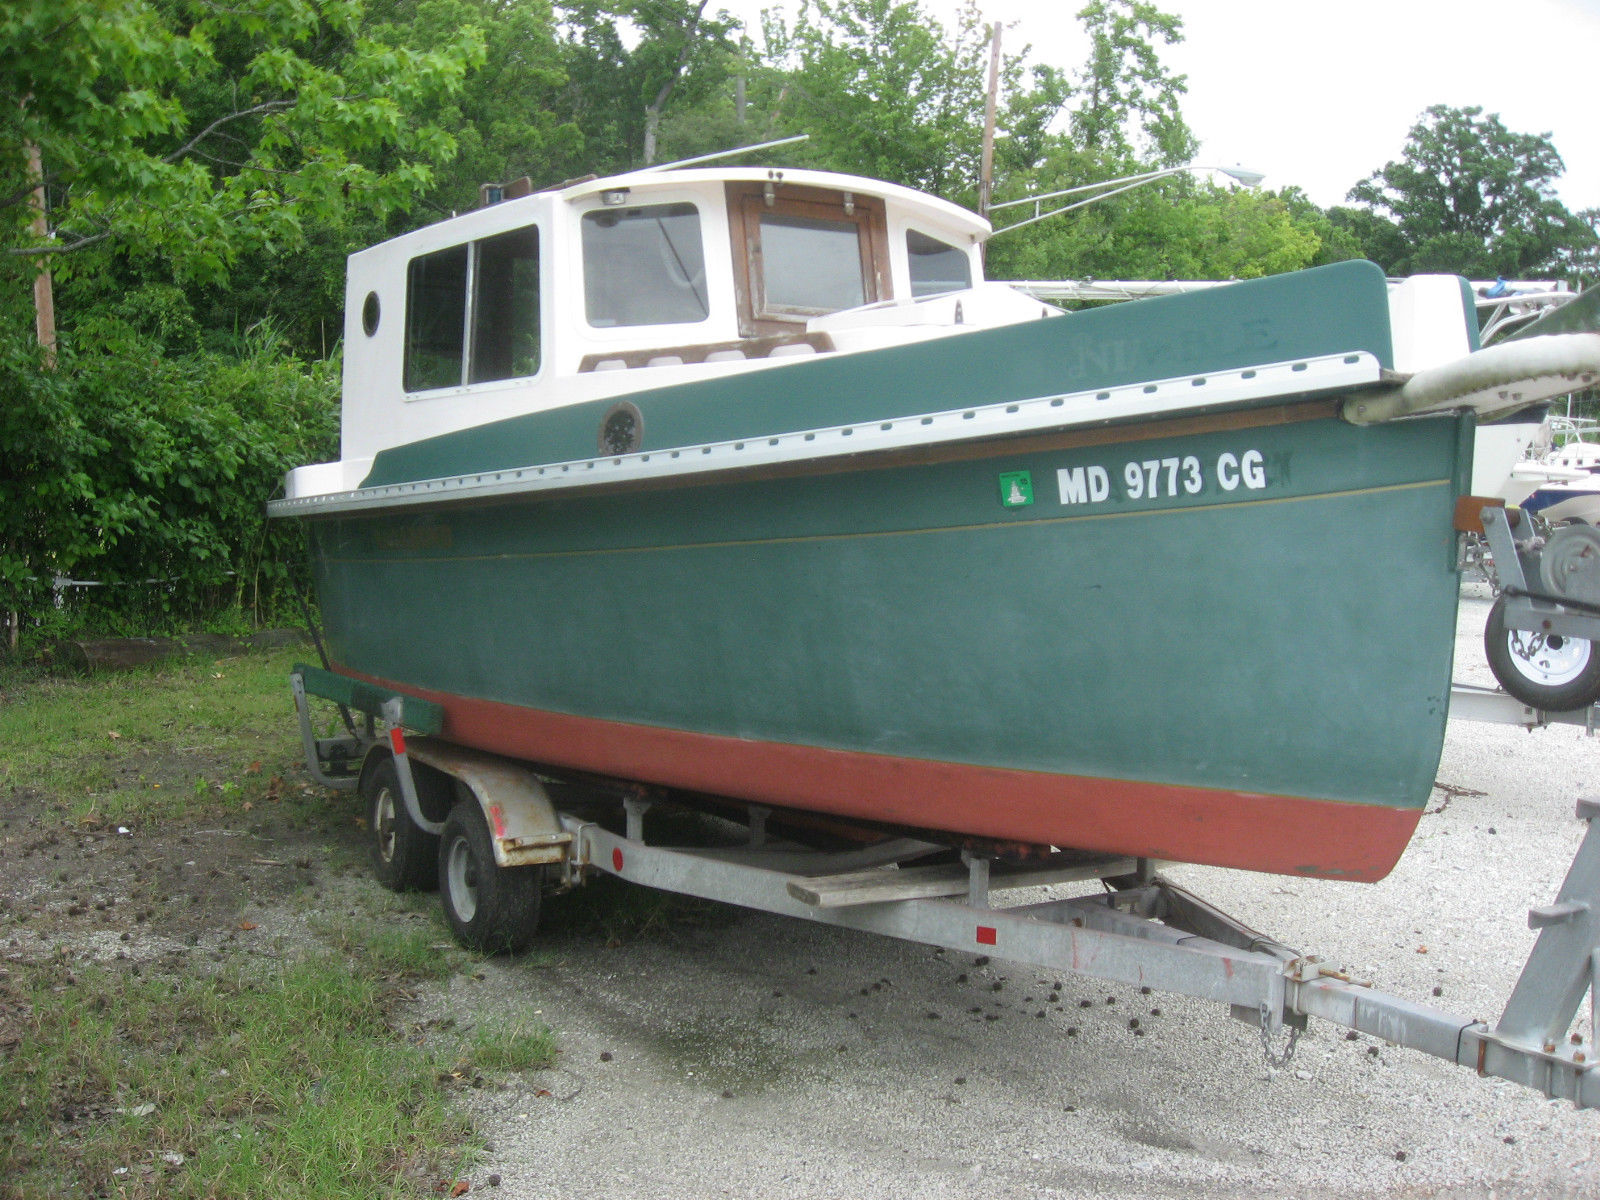 nimble boats for sale